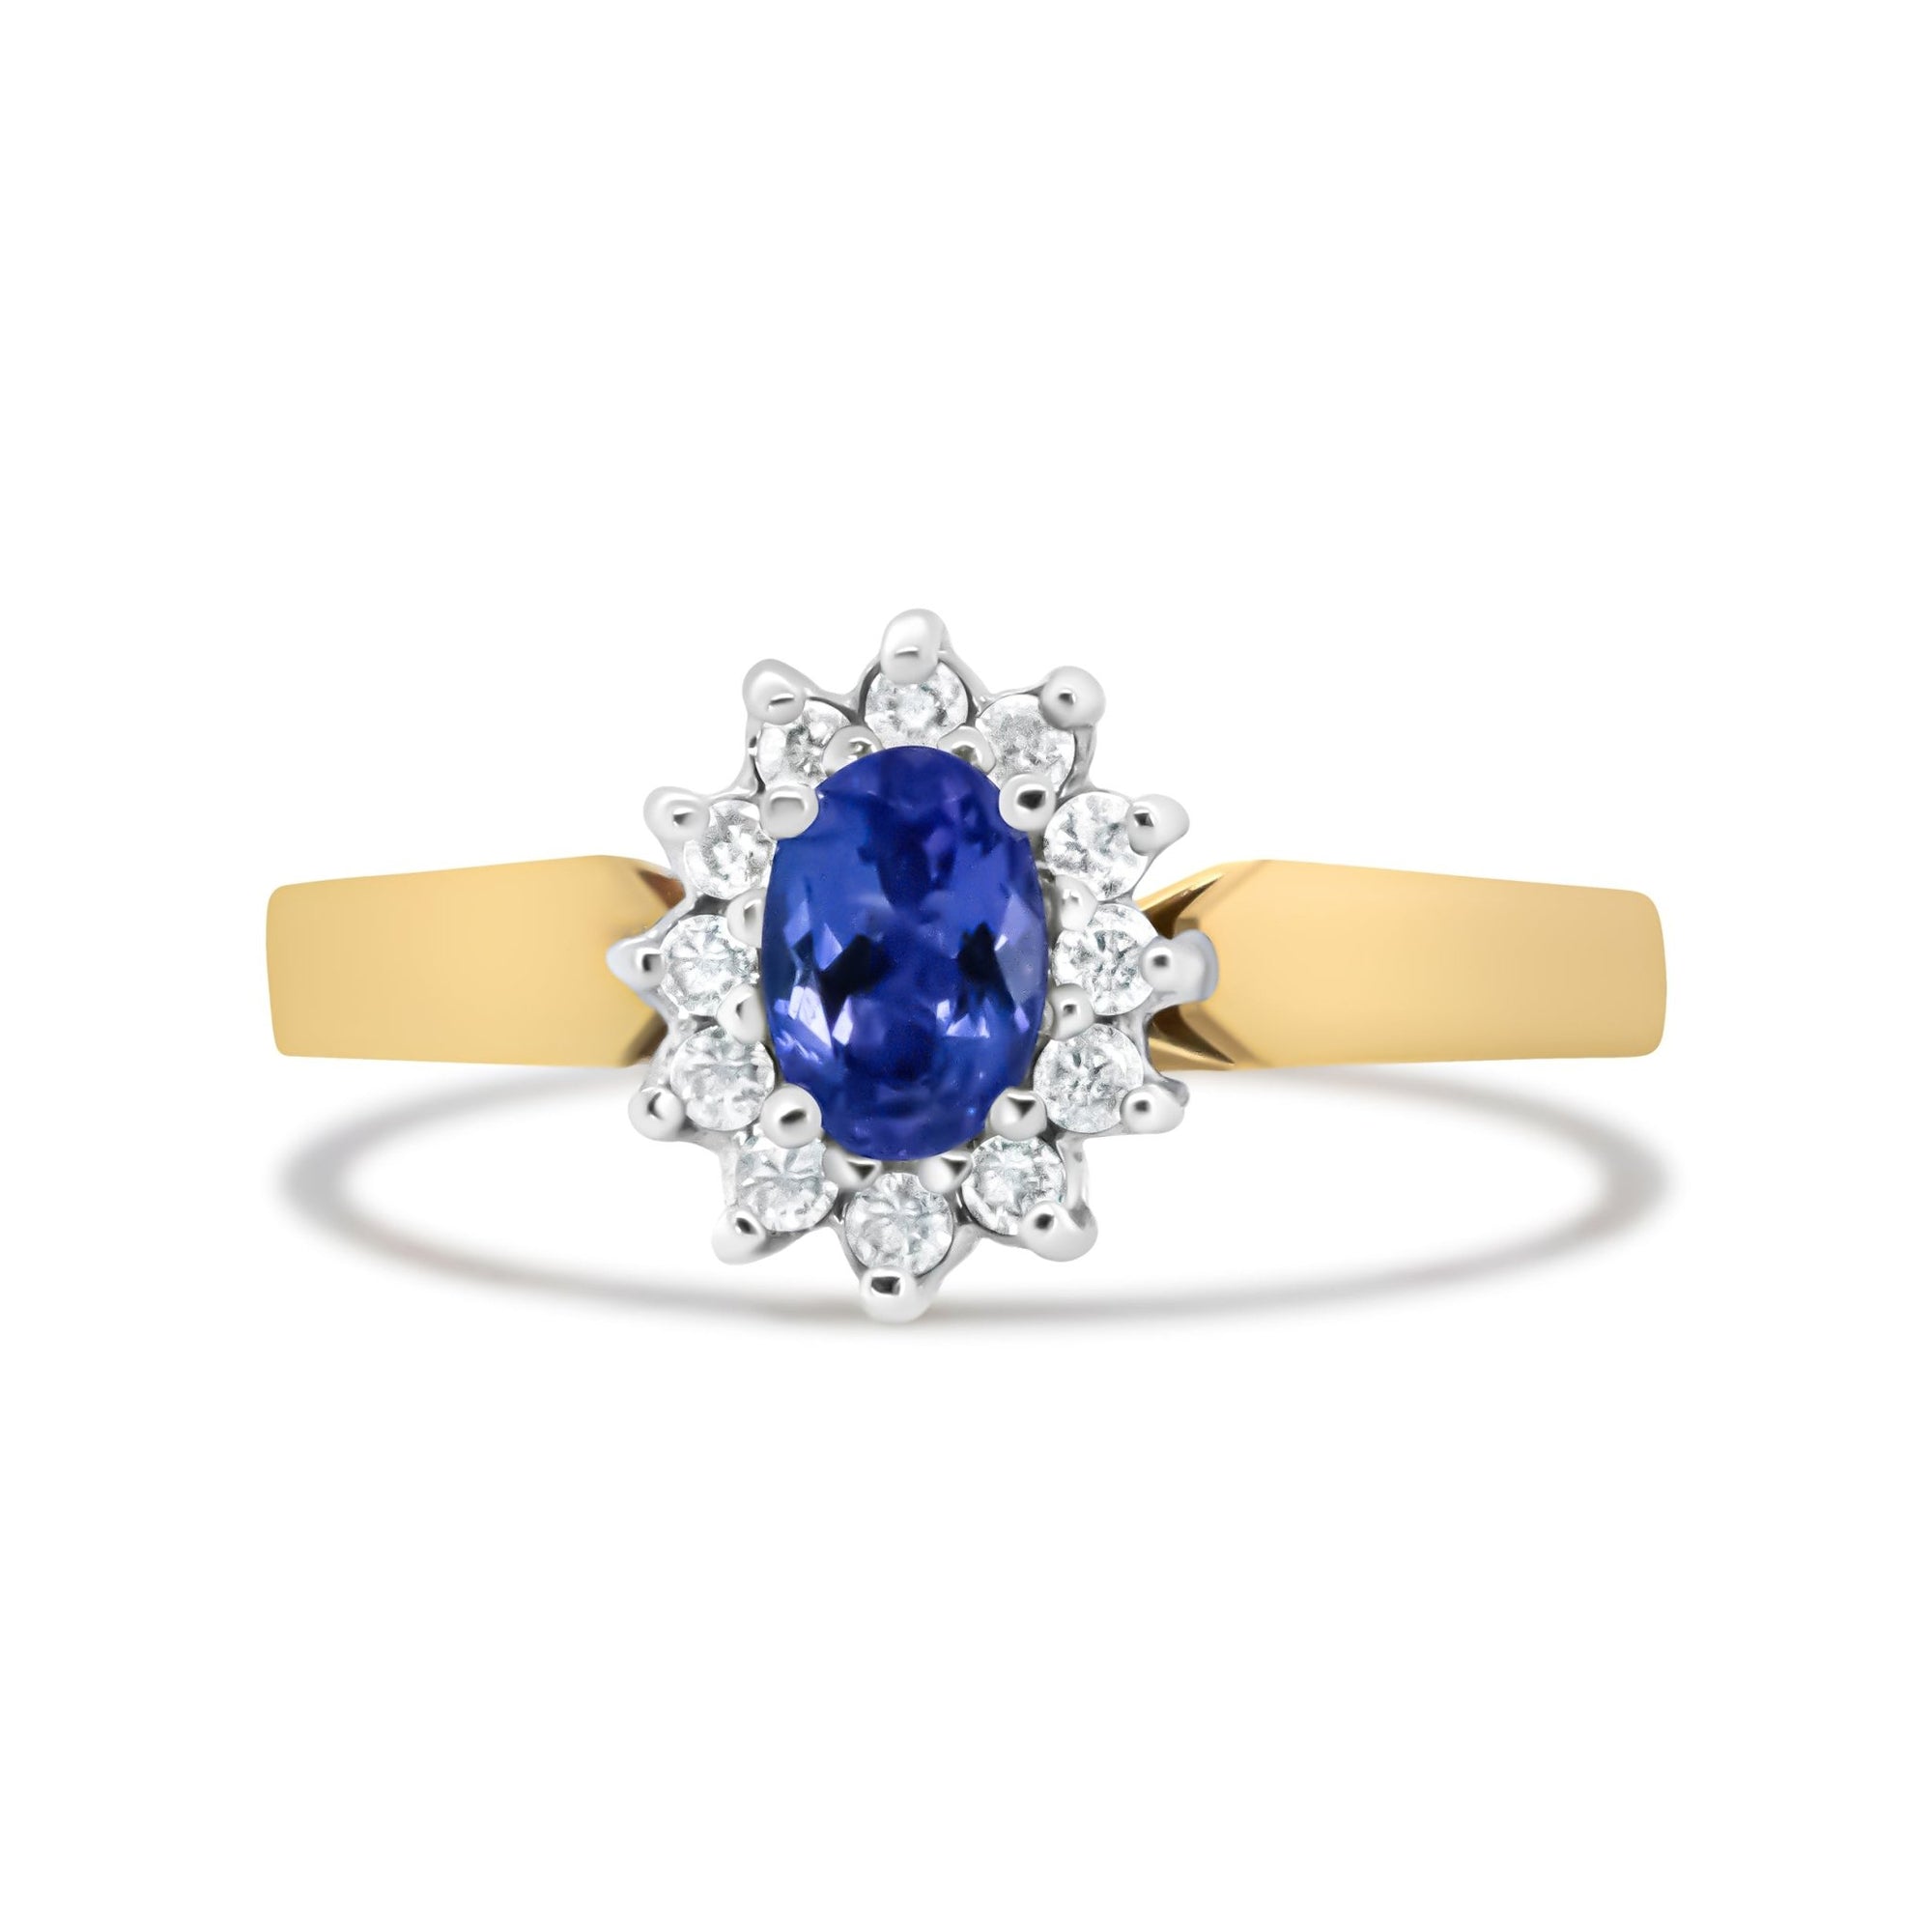 14K Yellow Gold 1/5 Cttw Round Diamond and 6x4mm Oval Blue Tanzanite Halo Ring (H-I Color, I1-I2 Clarity) - Size 7.75 - LinkagejewelrydesignLinkagejewelrydesign